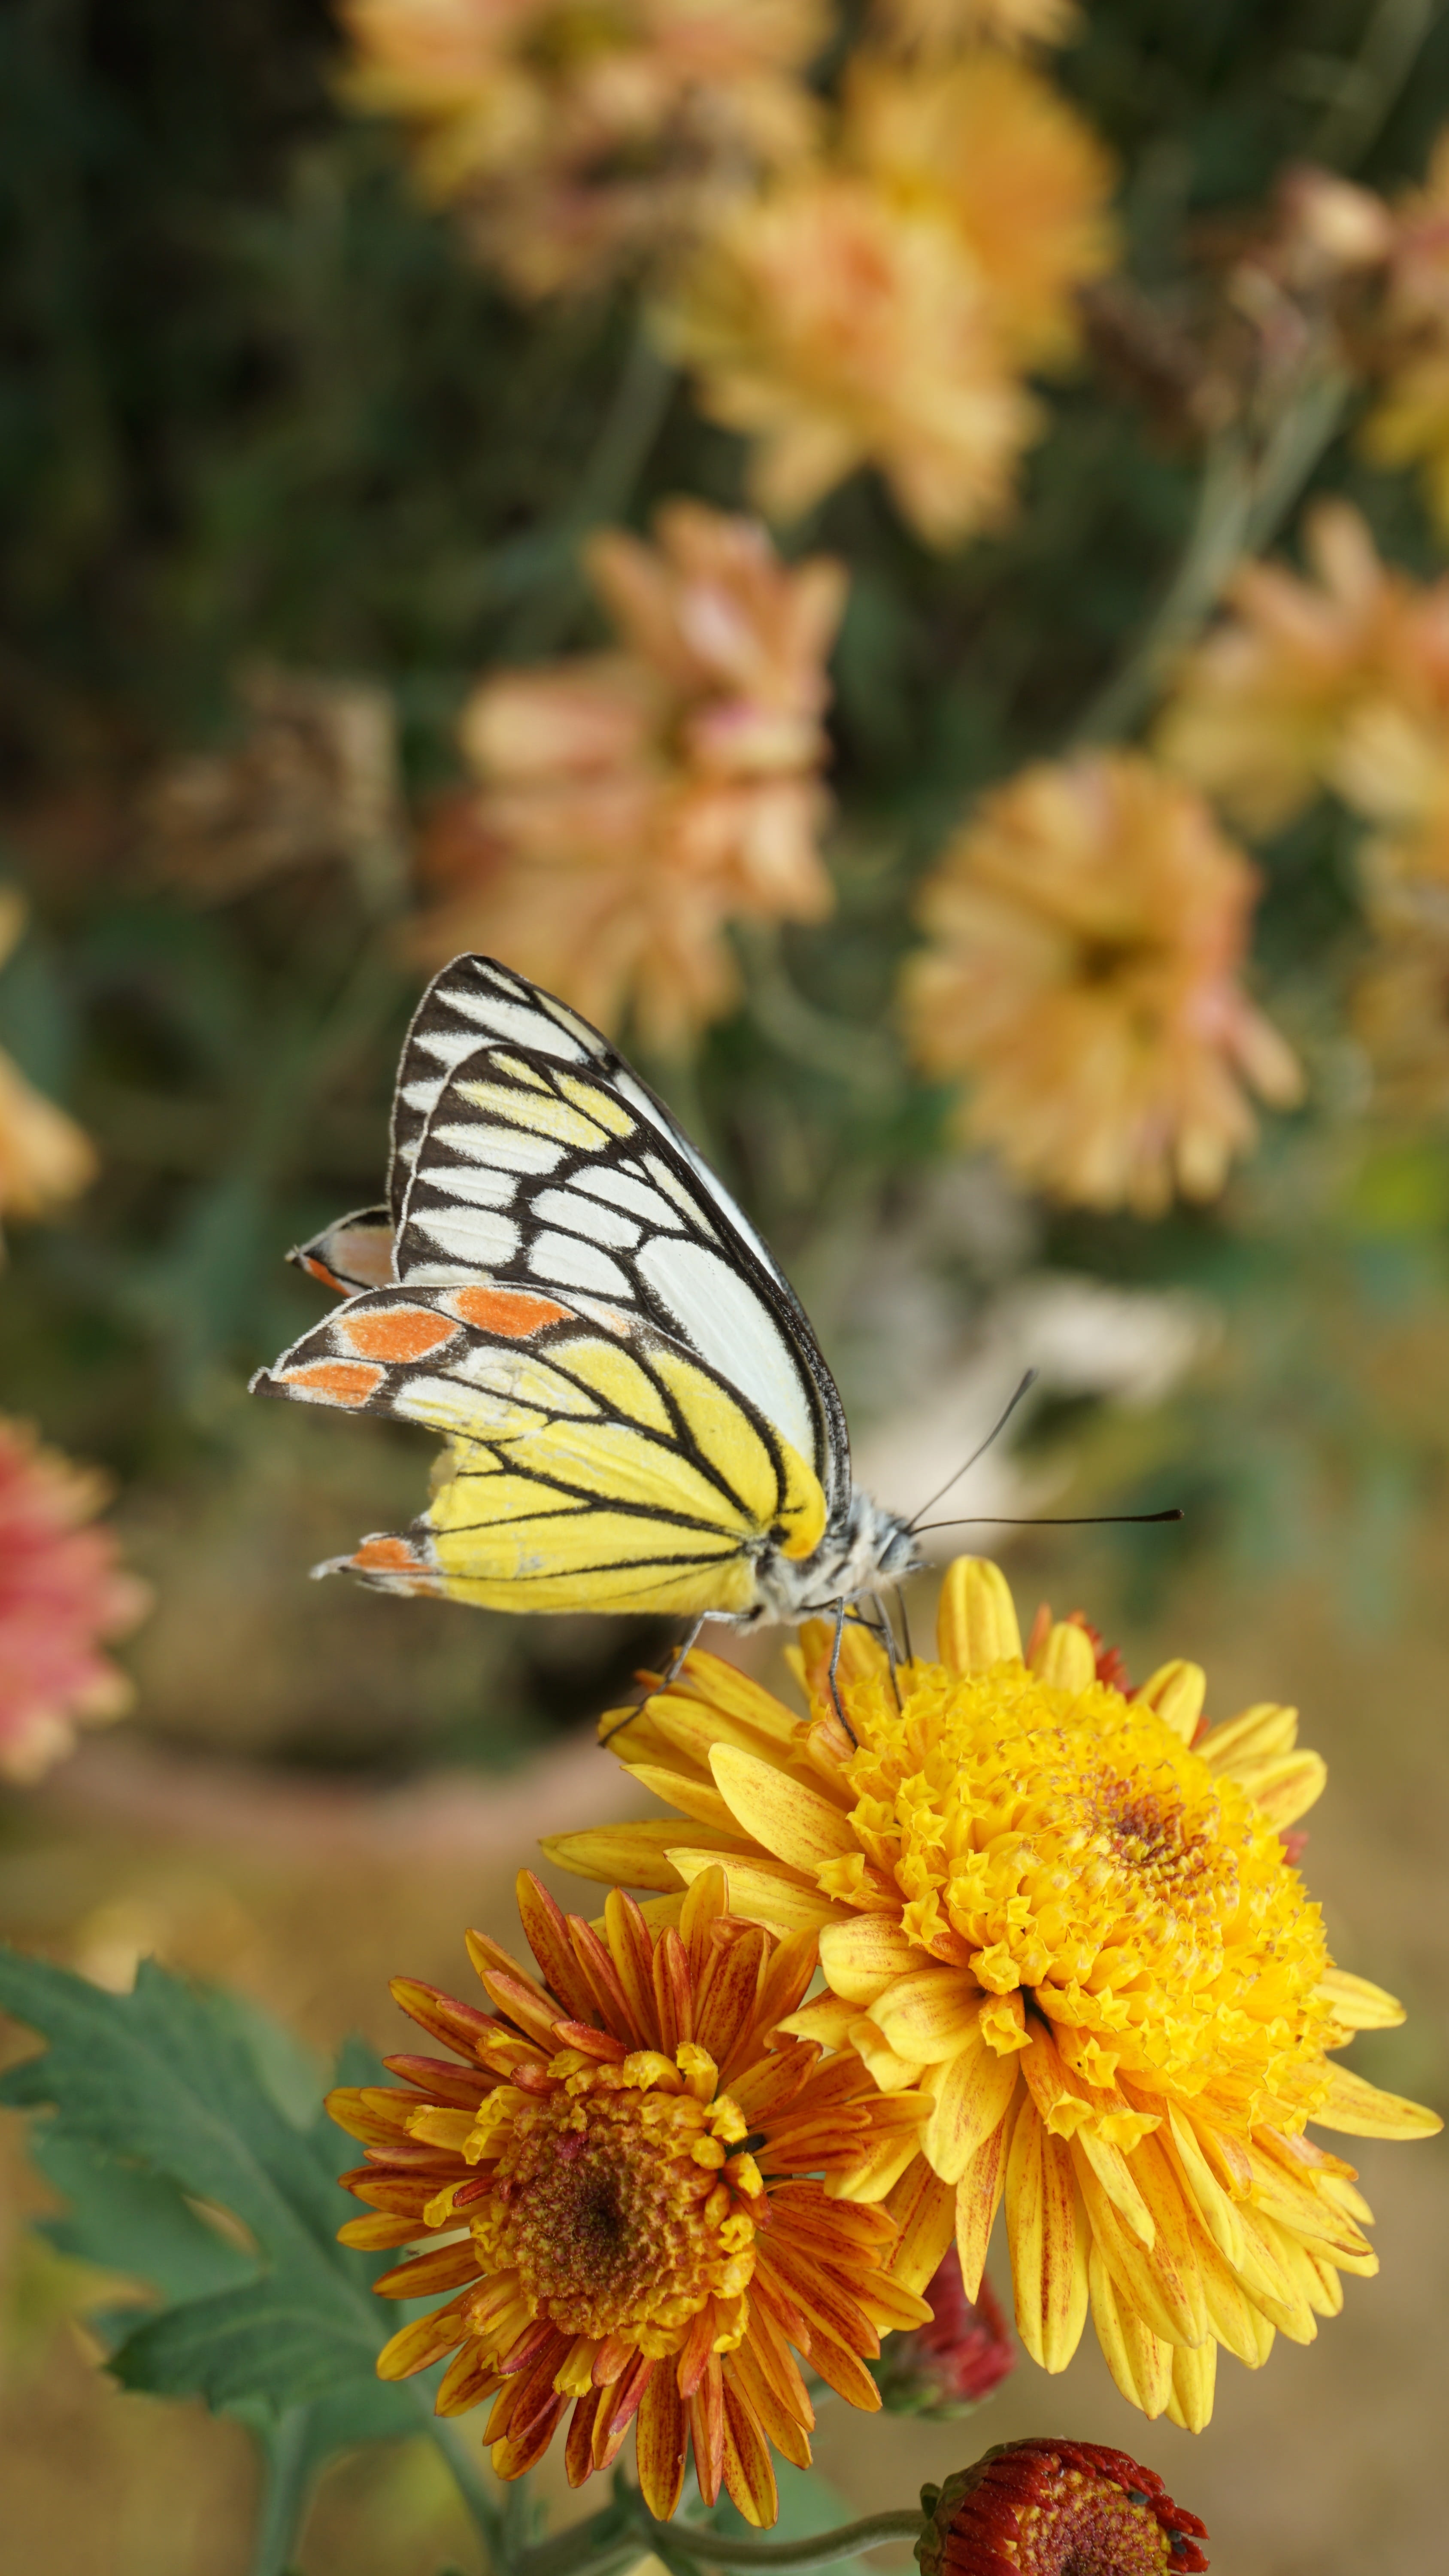 Butterfly, Blooming, Flower, floral, blossom, garden, nature